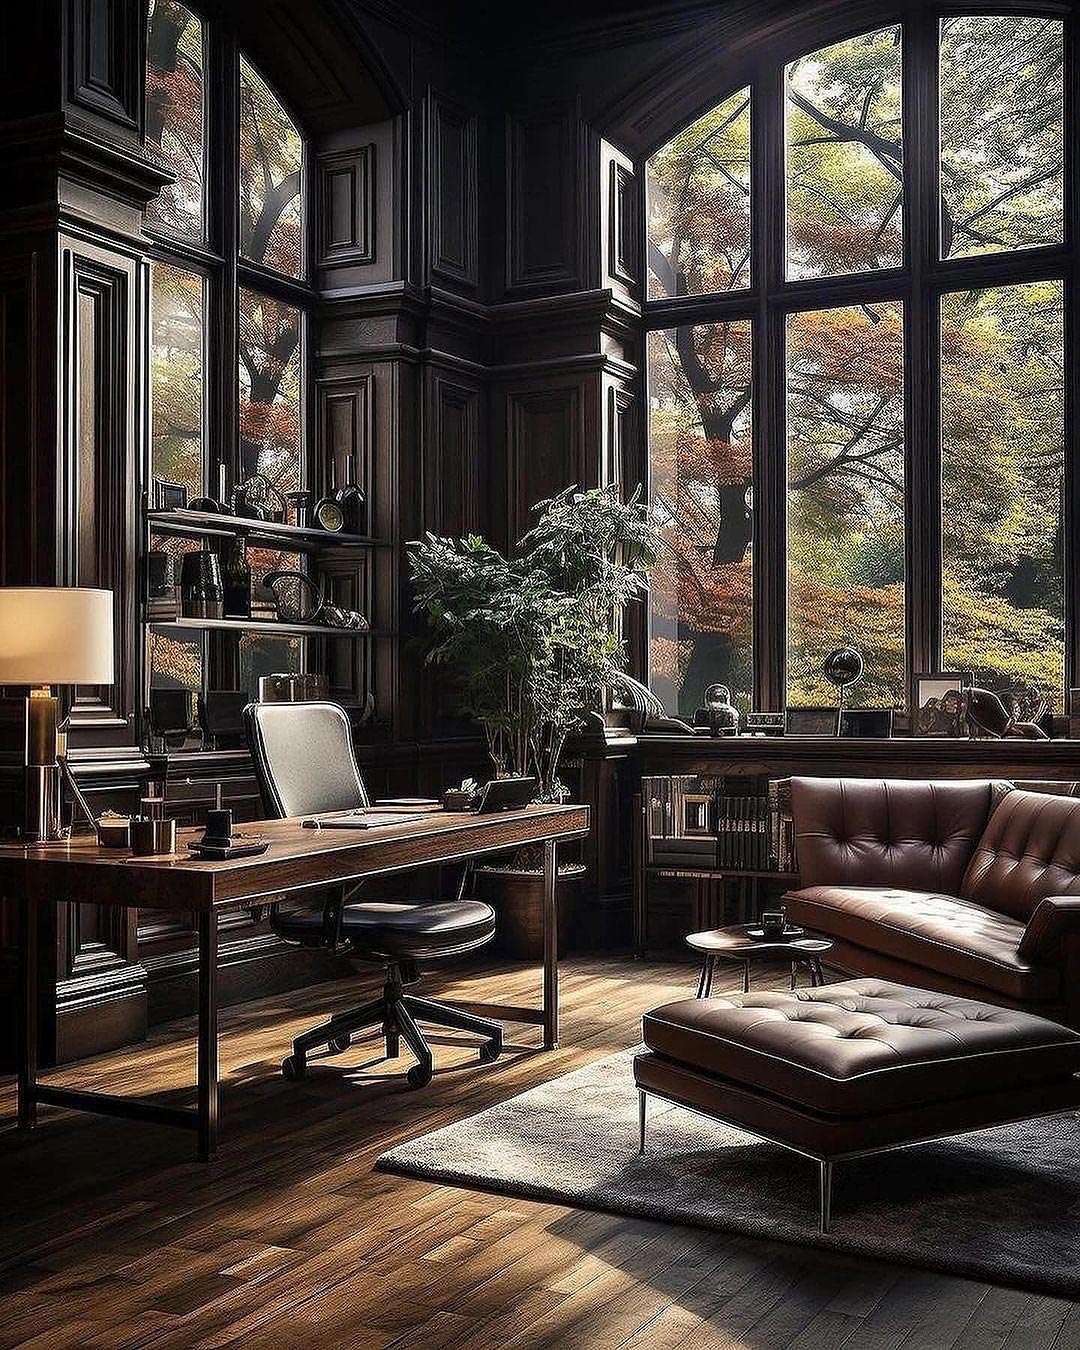 Traditional office overlooking overgrown trees outdoors